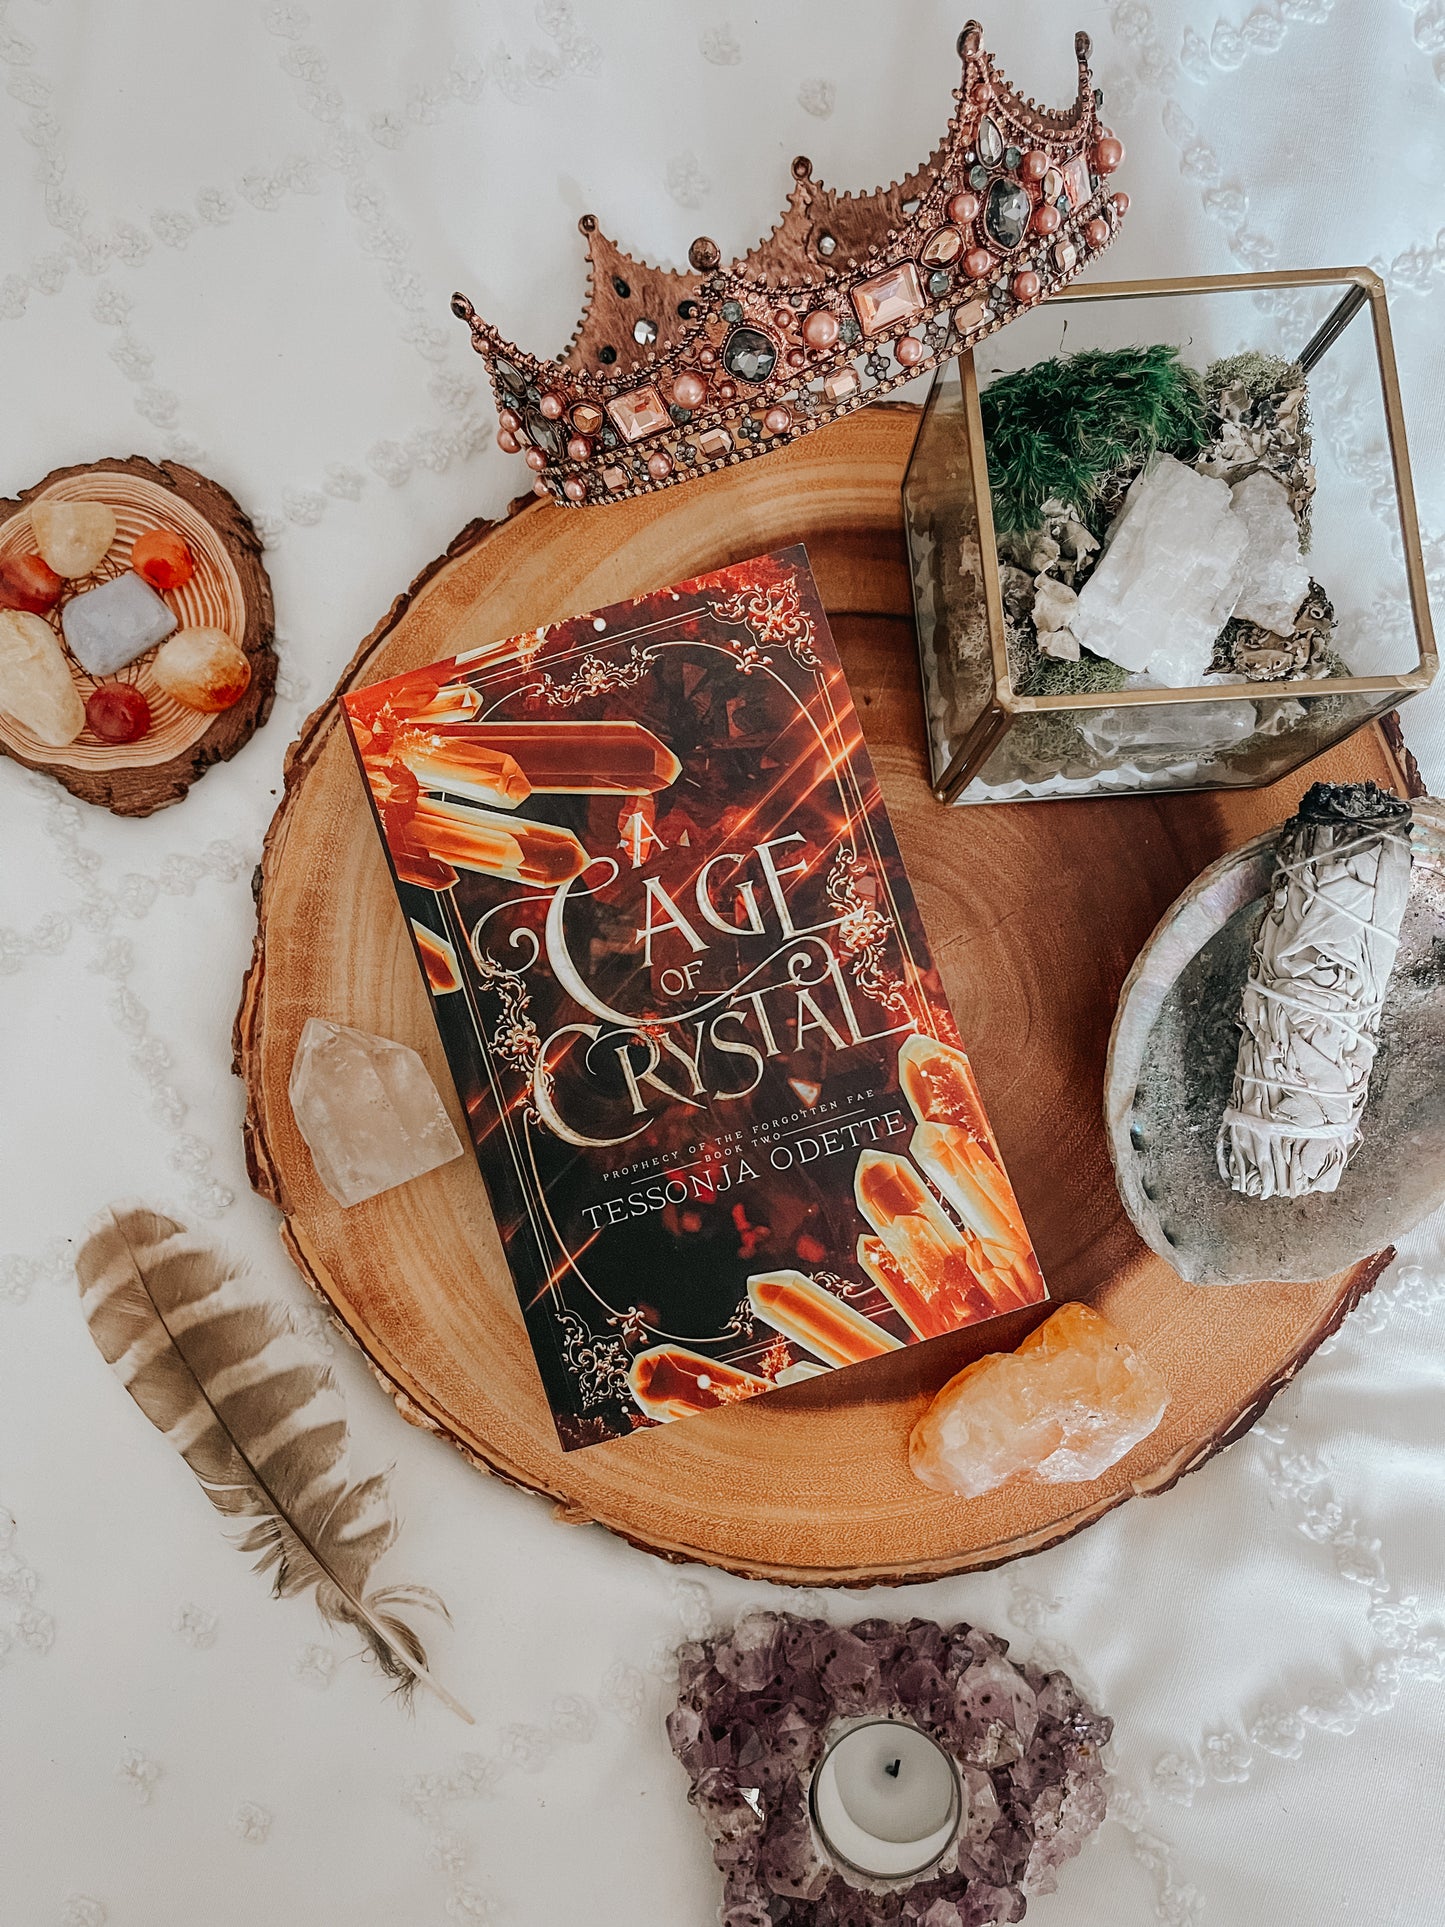 A Cage of Crystal (paperback) signed